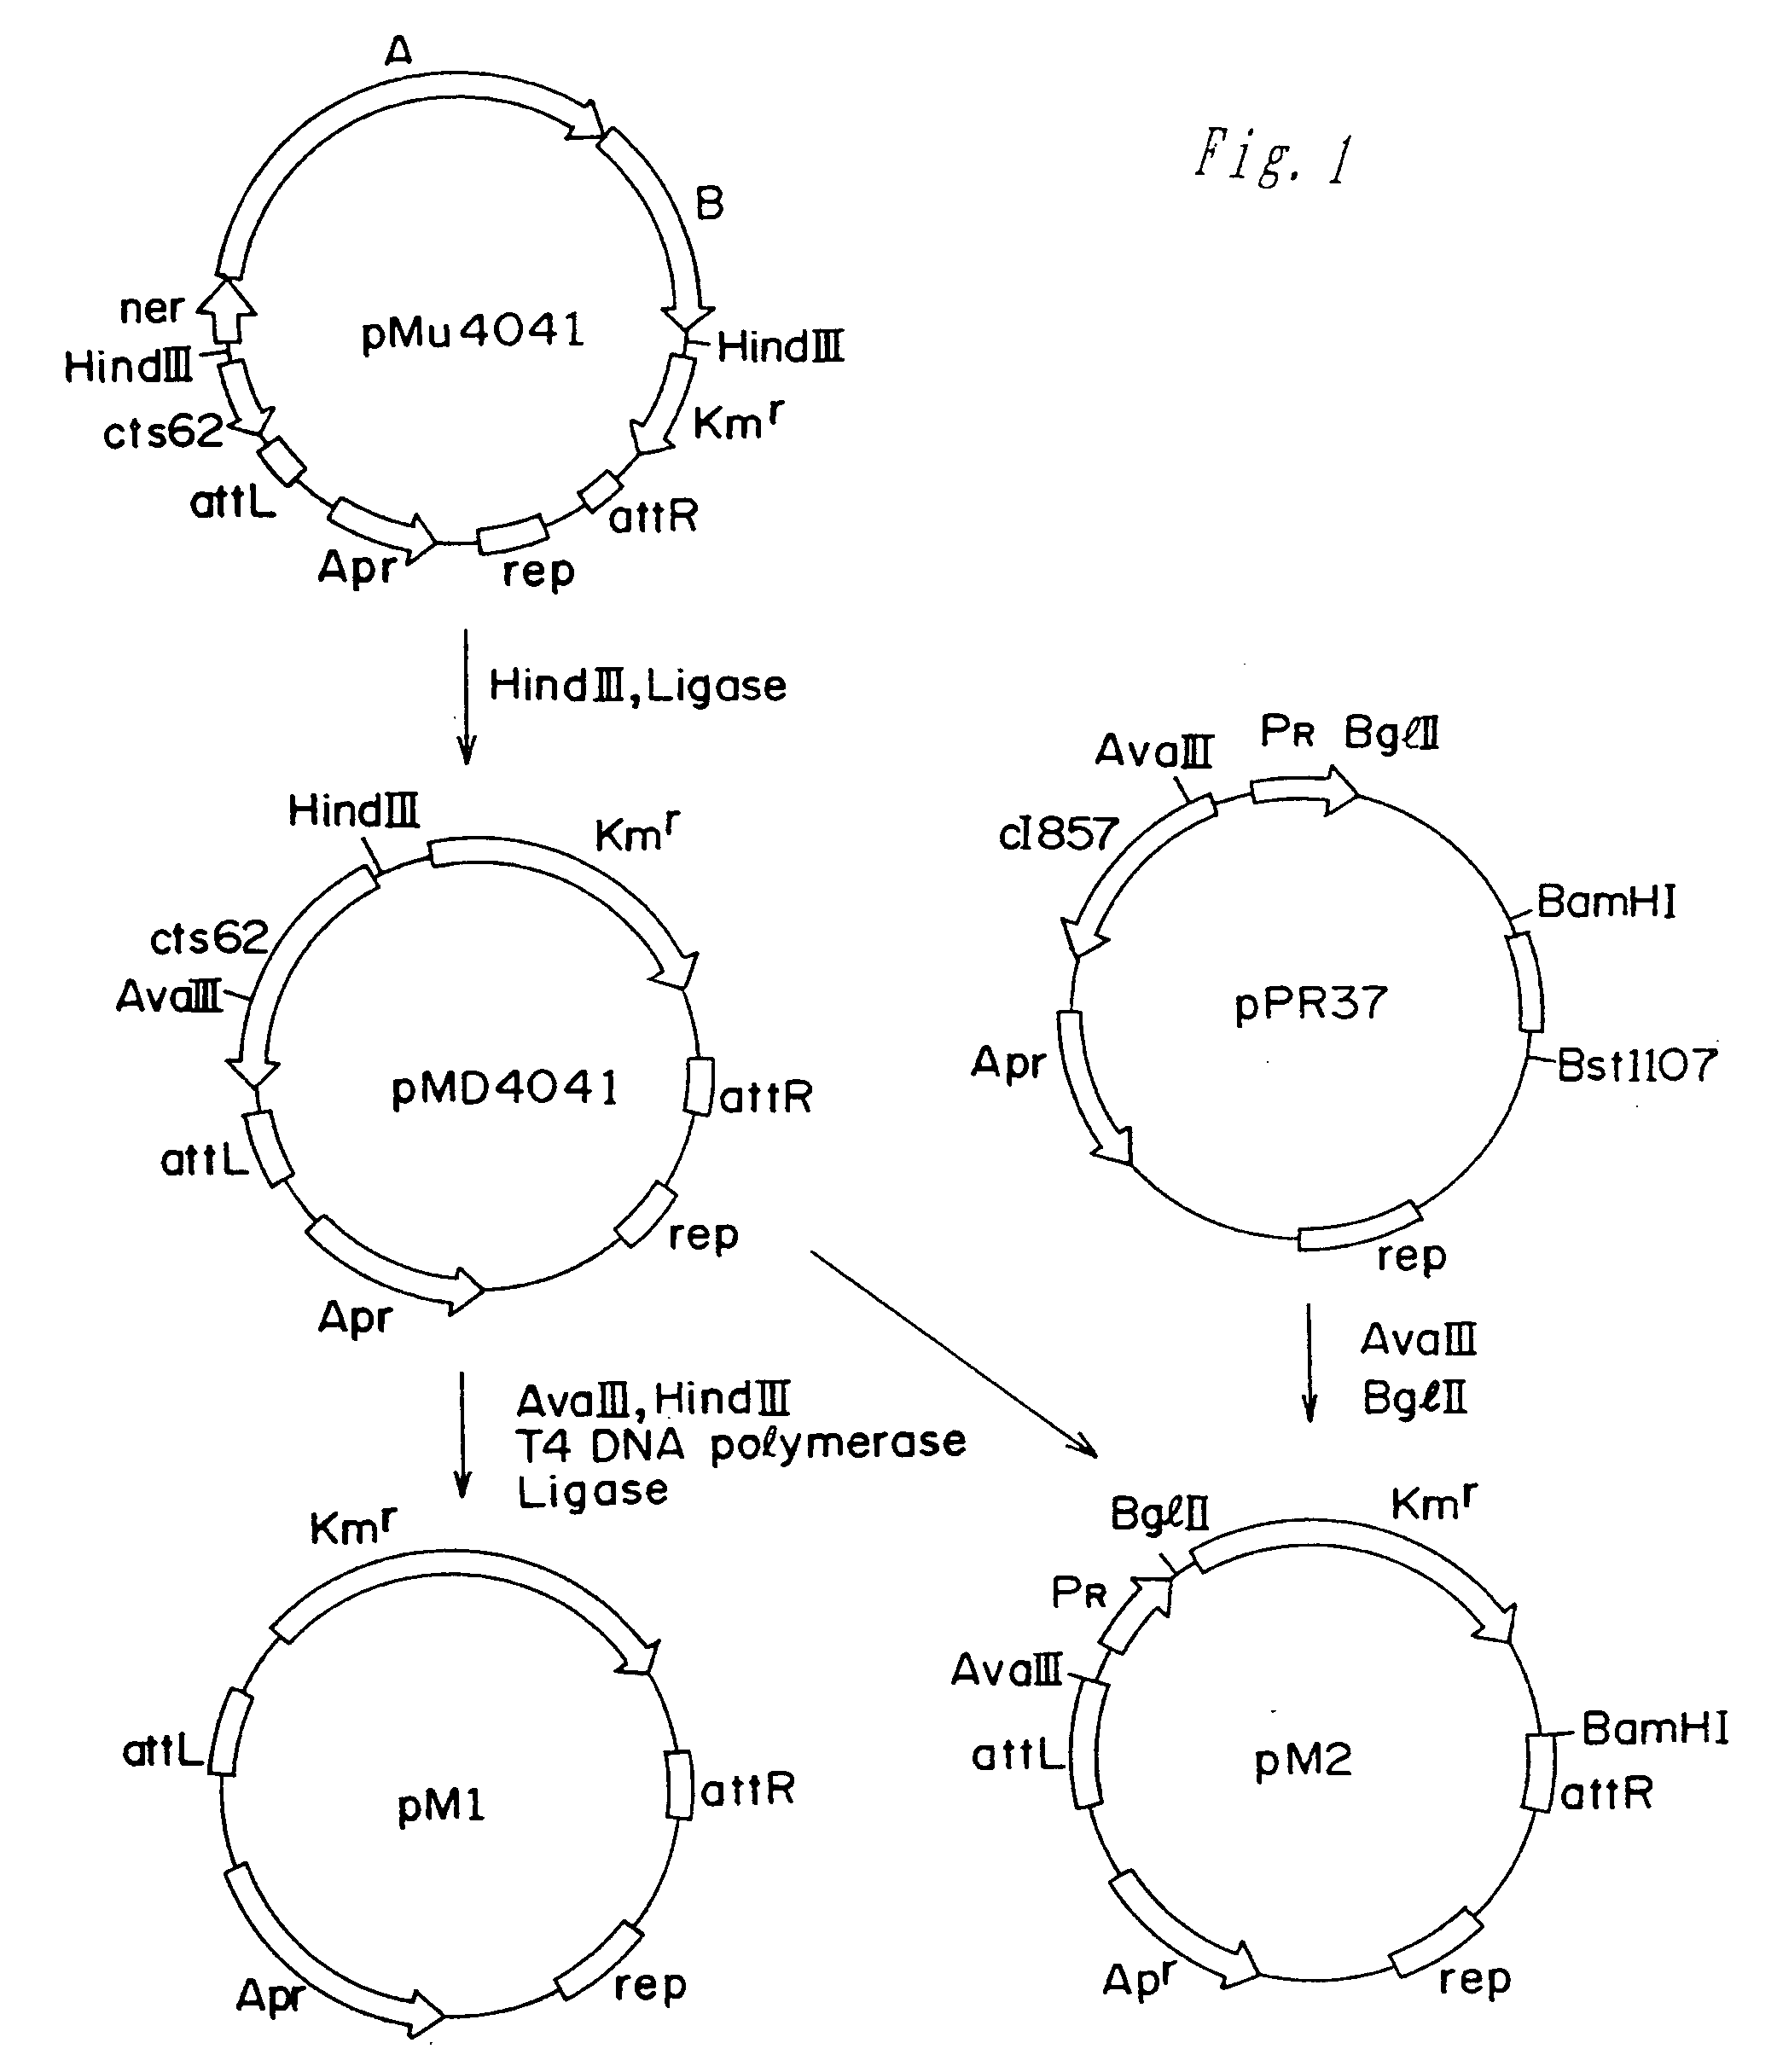 Amino acid producing strains belonging to the genus Escherichia and a method for producing an amino acid